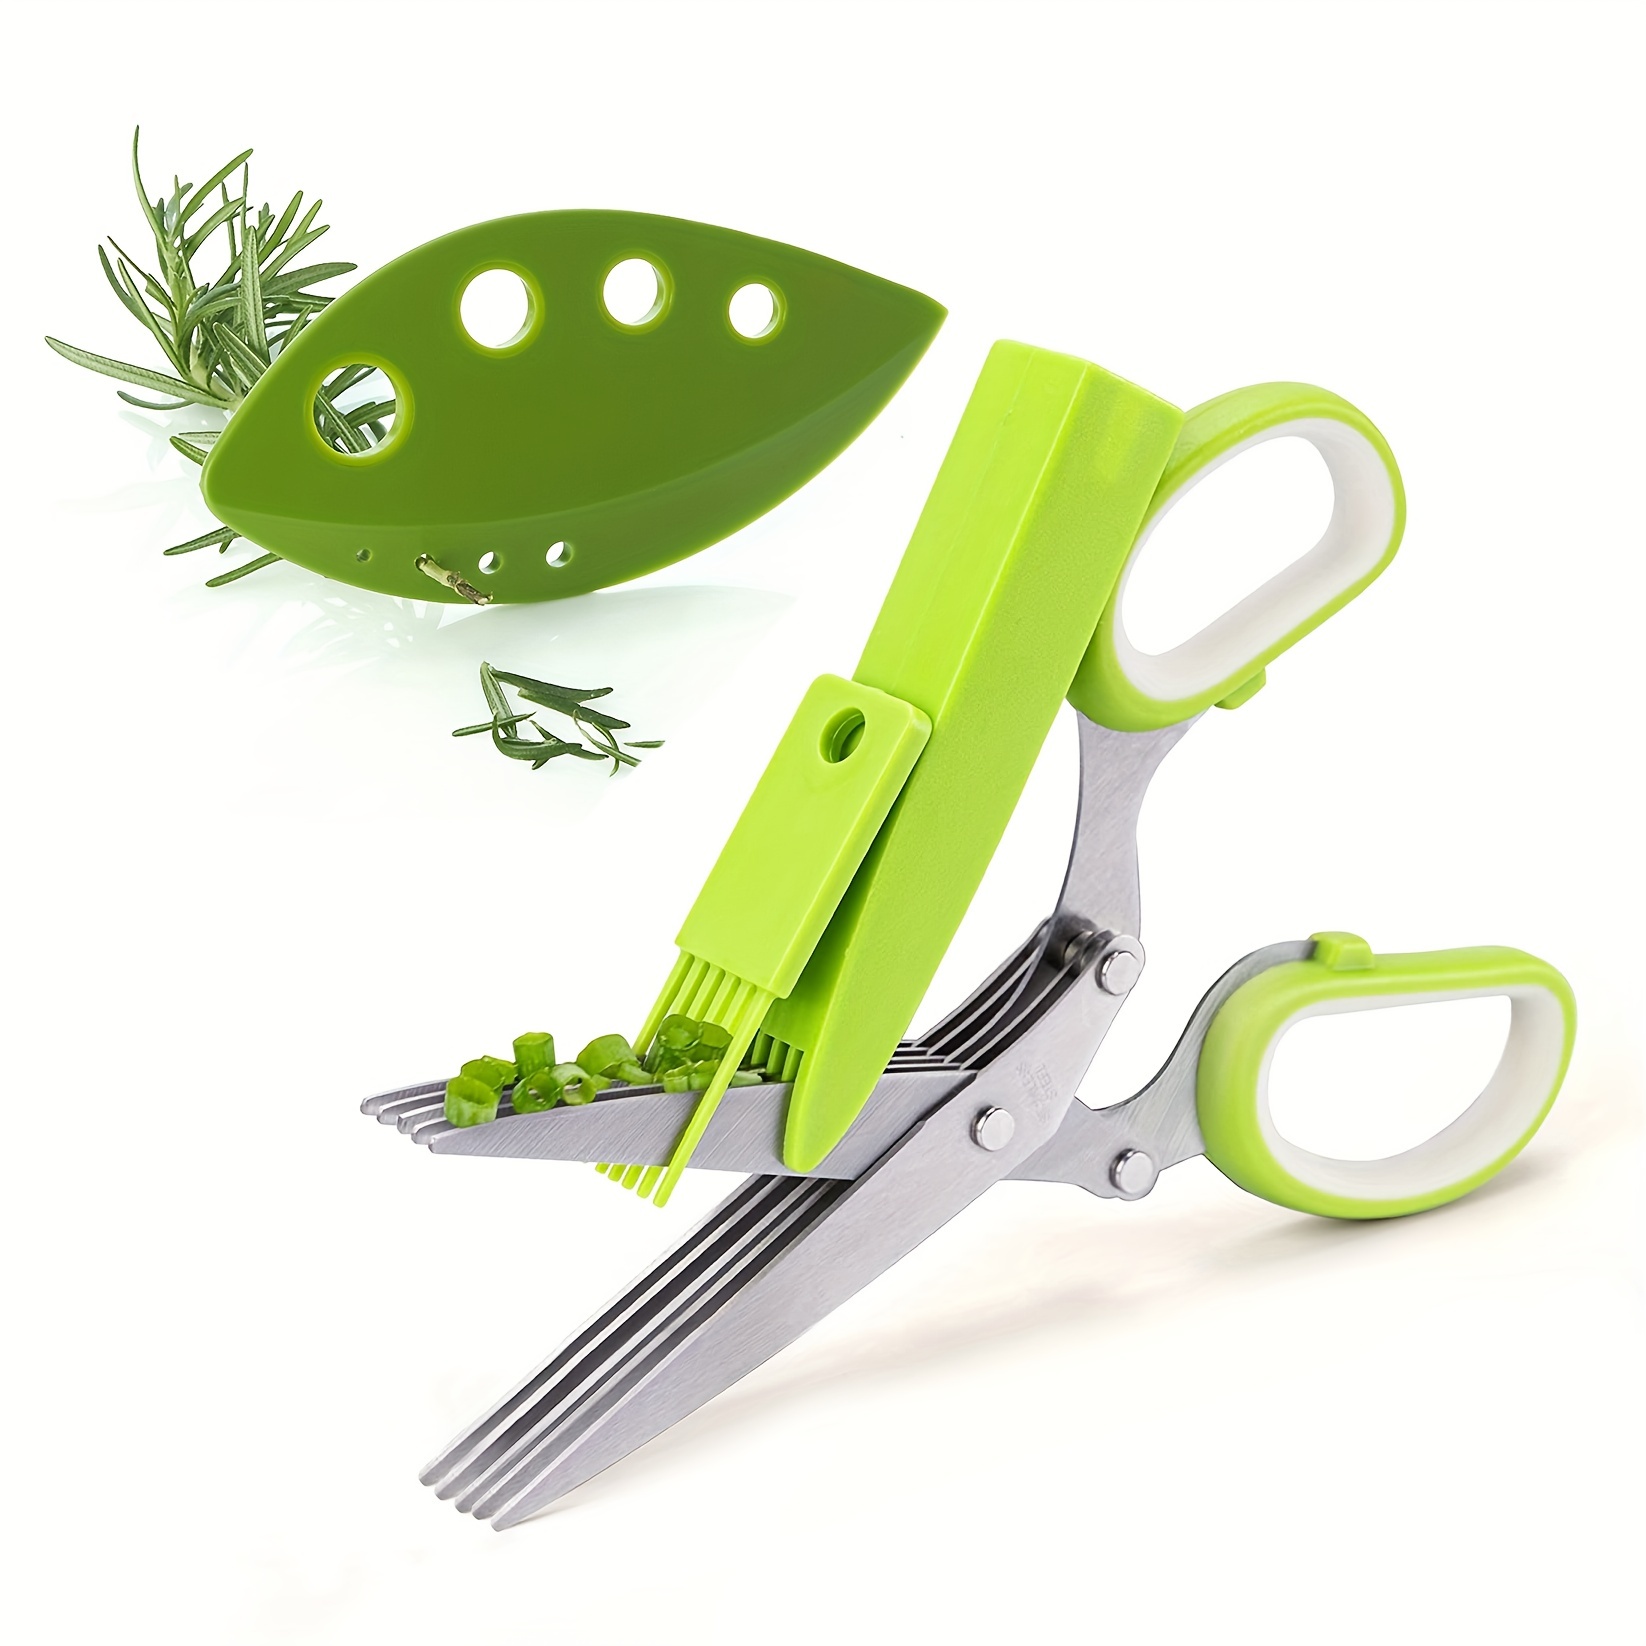 Kitchen Shears Herb Scissors Vegetable Peeler Set, Heavy Duty Kitchen  Scissors for Meat Poultry Fish, Herb Cutter Shears with 5 Blades, 2 in 1  Vegetable Peeler, Pack of 3 Multipurpose Kitchen Gadgets 